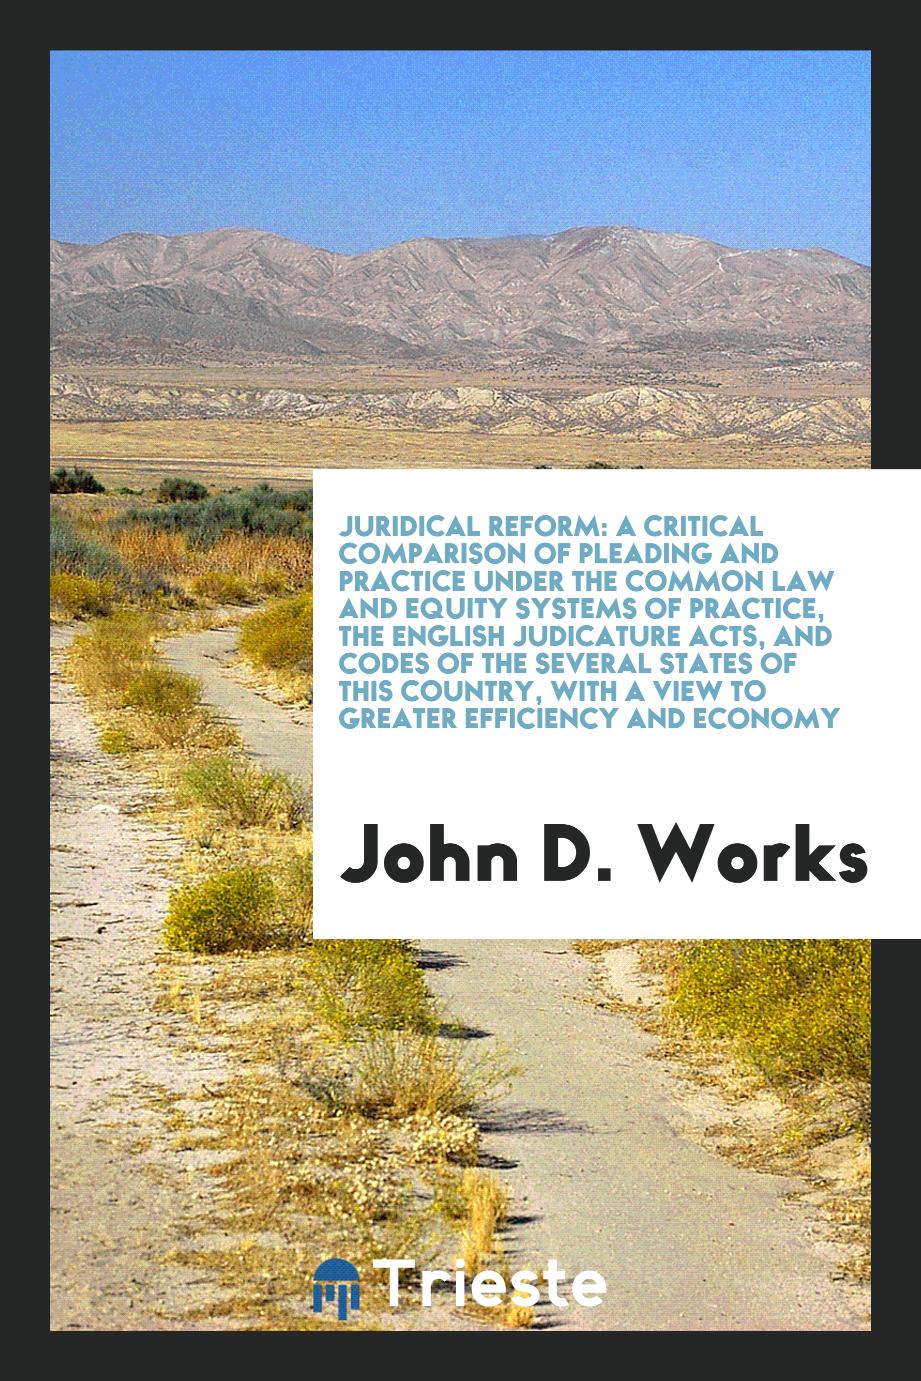 Juridical Reform: A Critical Comparison of Pleading and Practice Under the Common Law and Equity Systems of Practice, the English Judicature Acts, and Codes of the Several States of this Country, with a View to Greater Efficiency and Economy